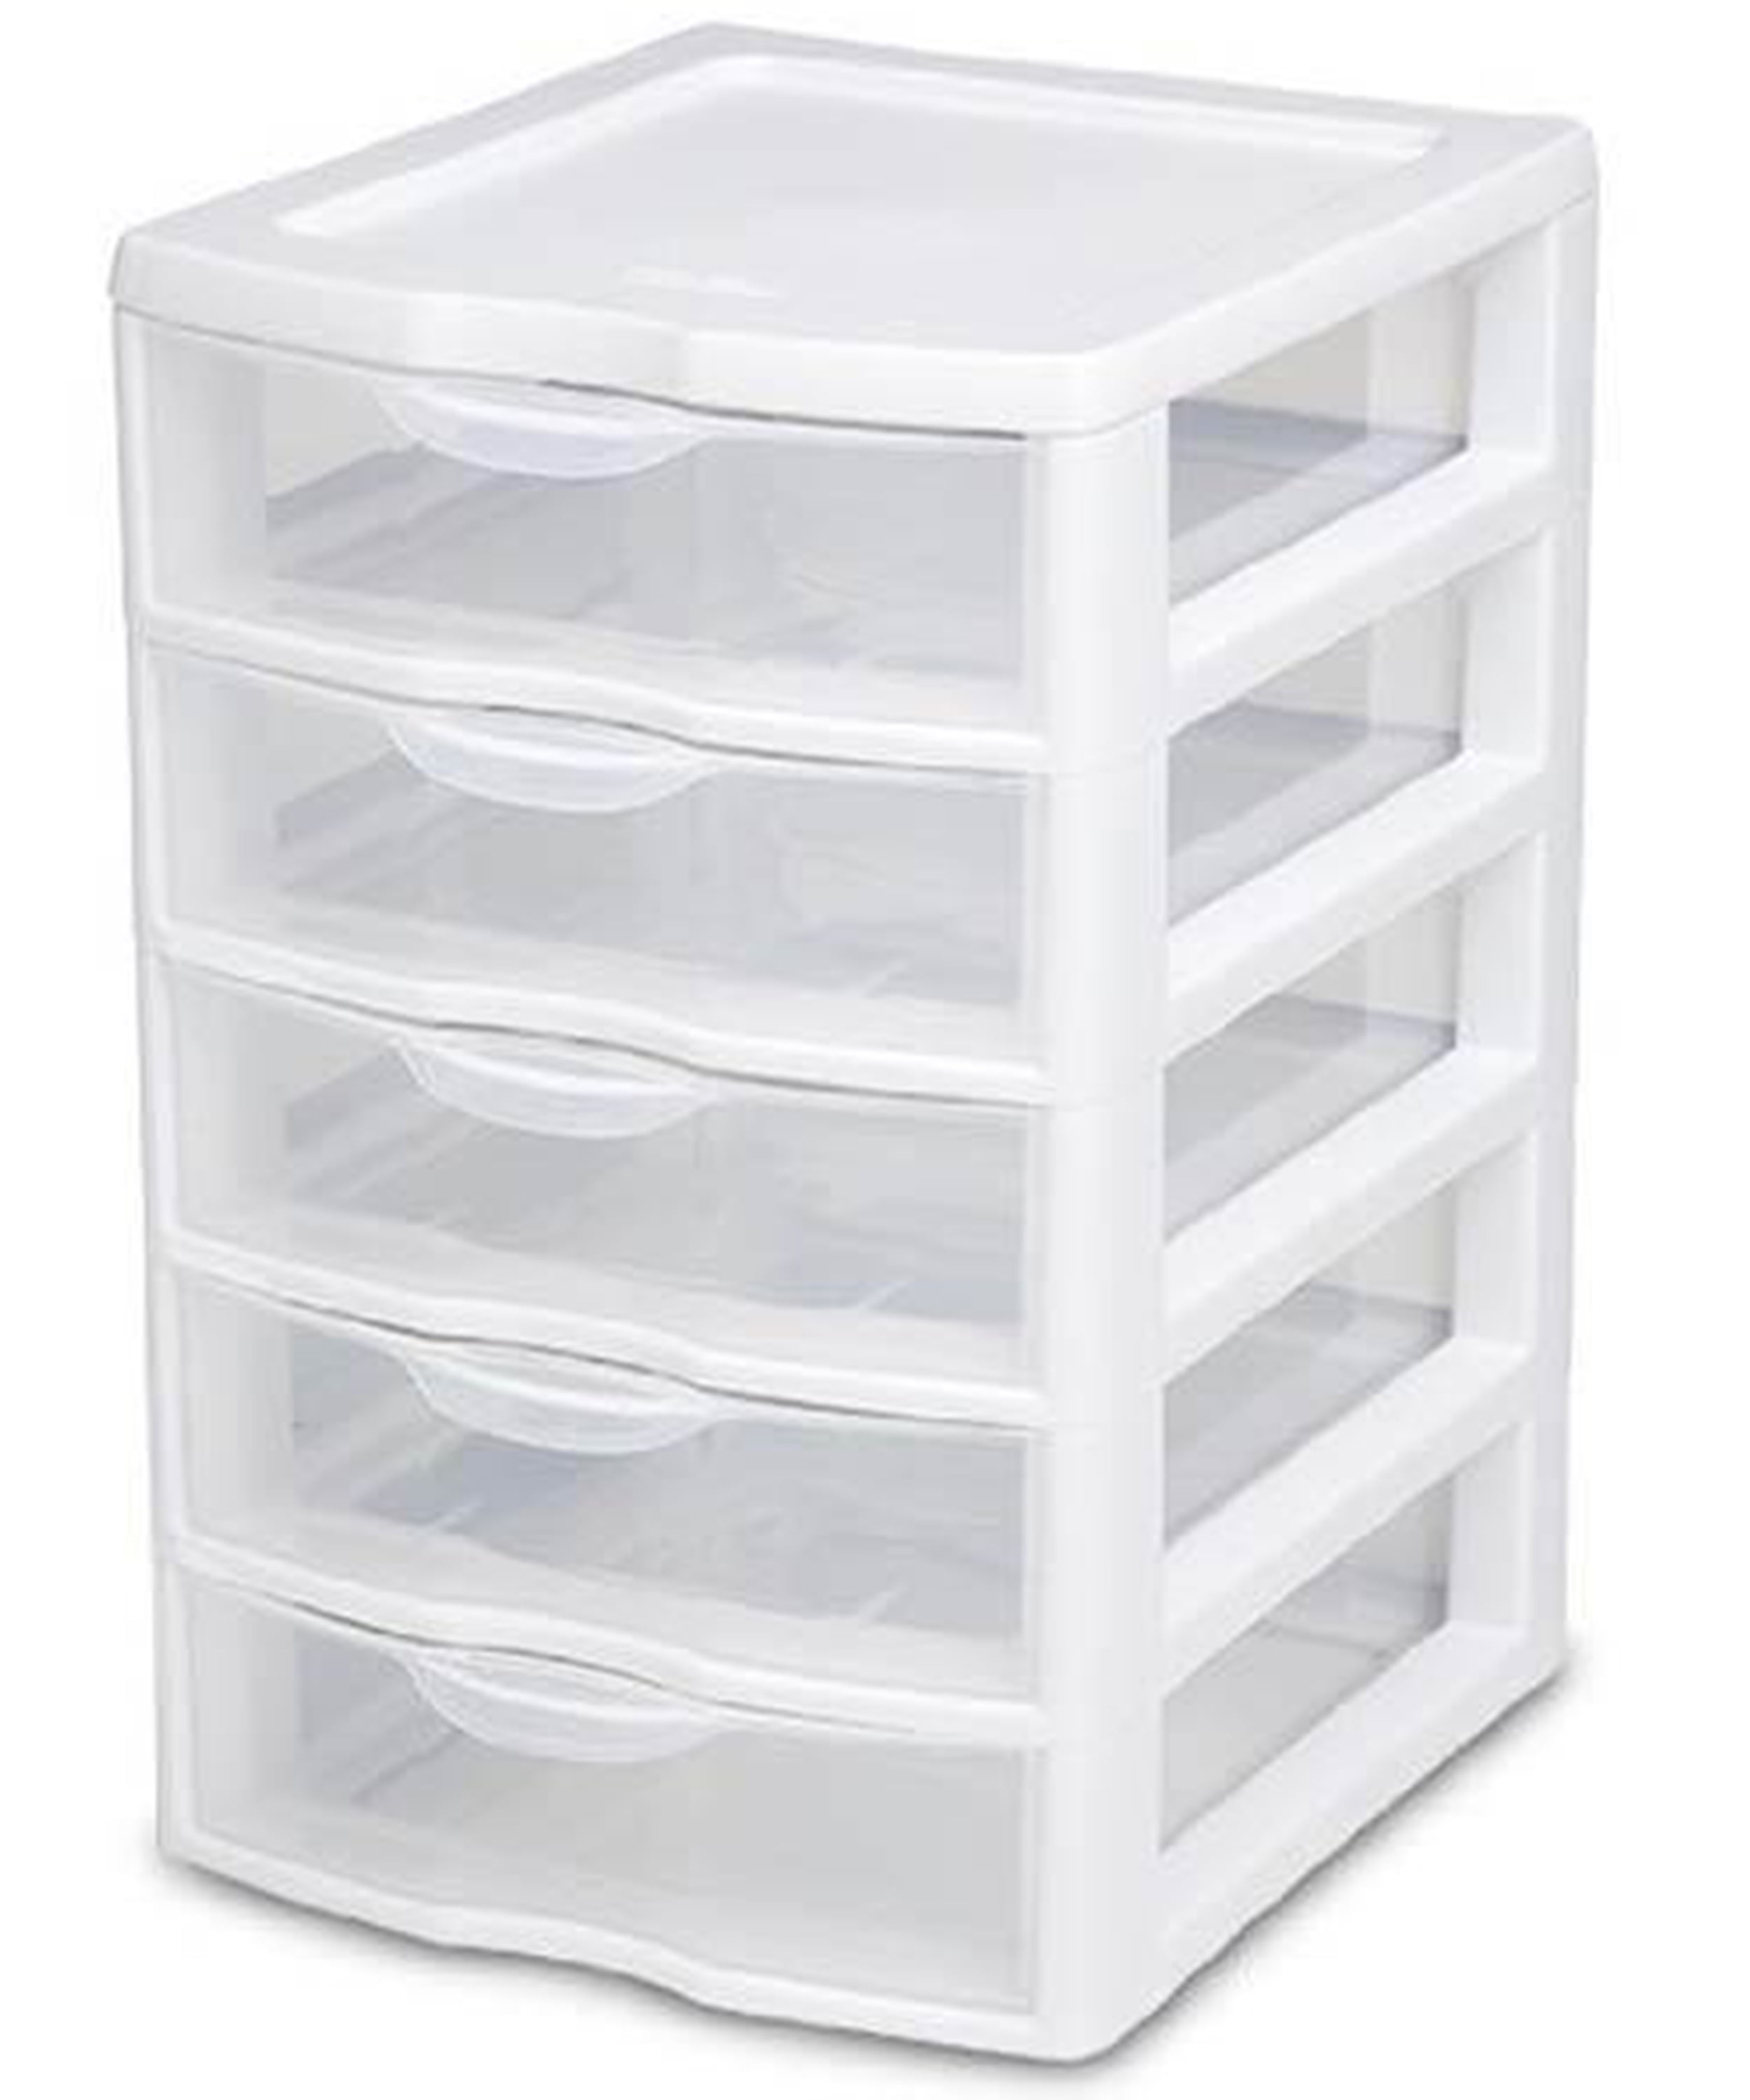 2 PACK 5 Drawer Storage Tower Organizer Box Home Room Clear Sterilite Cabinet 